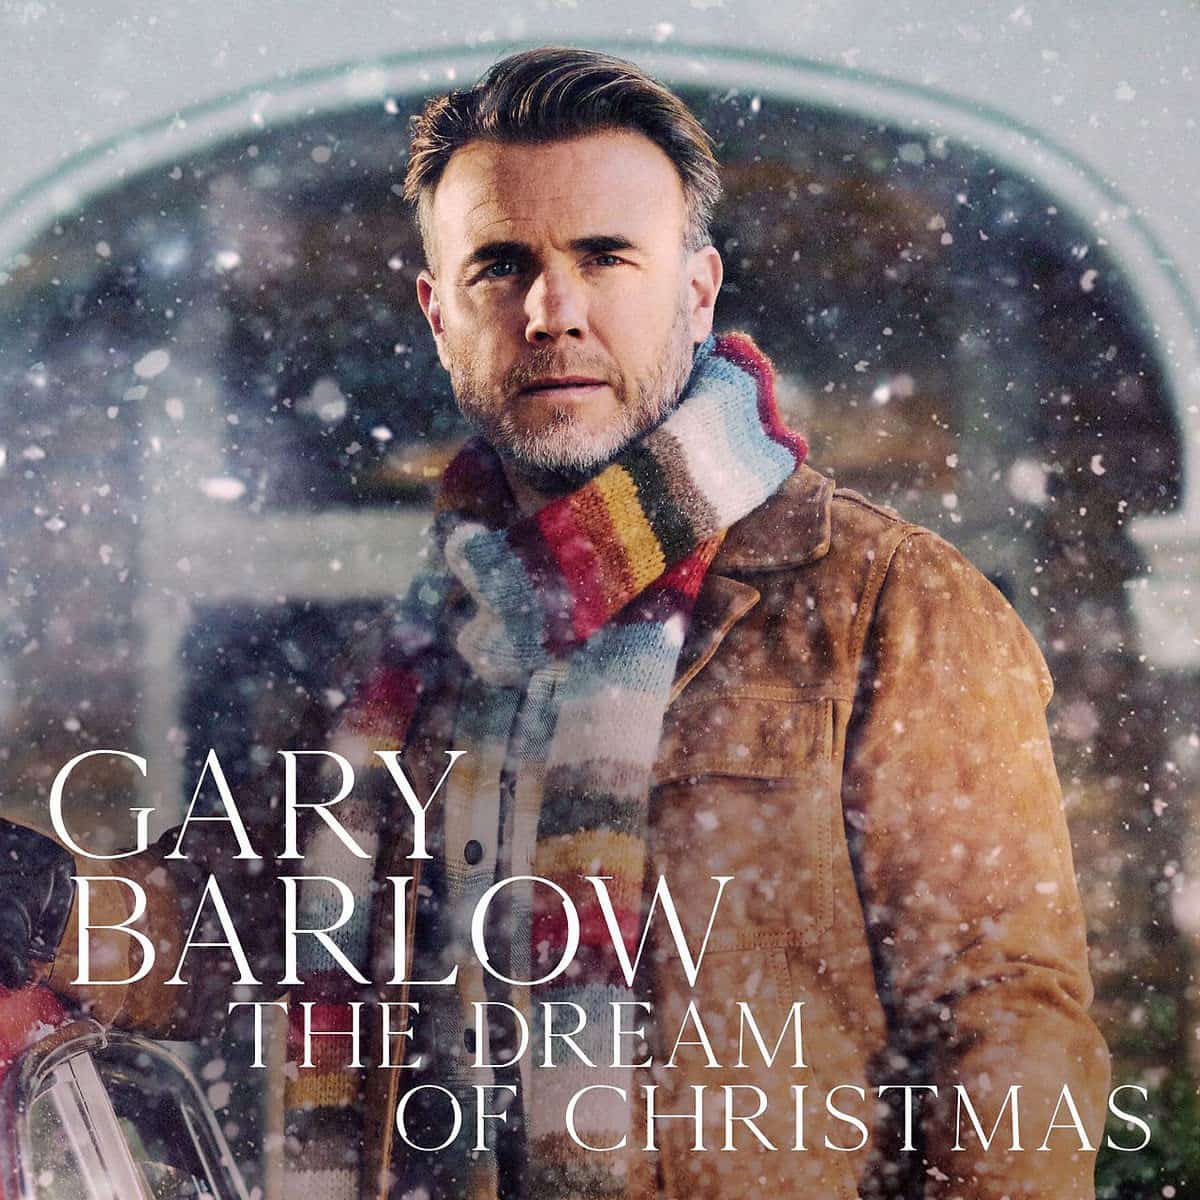 Gary Barlow "The Dream of Christmas" - Weihnachts-CD 2021